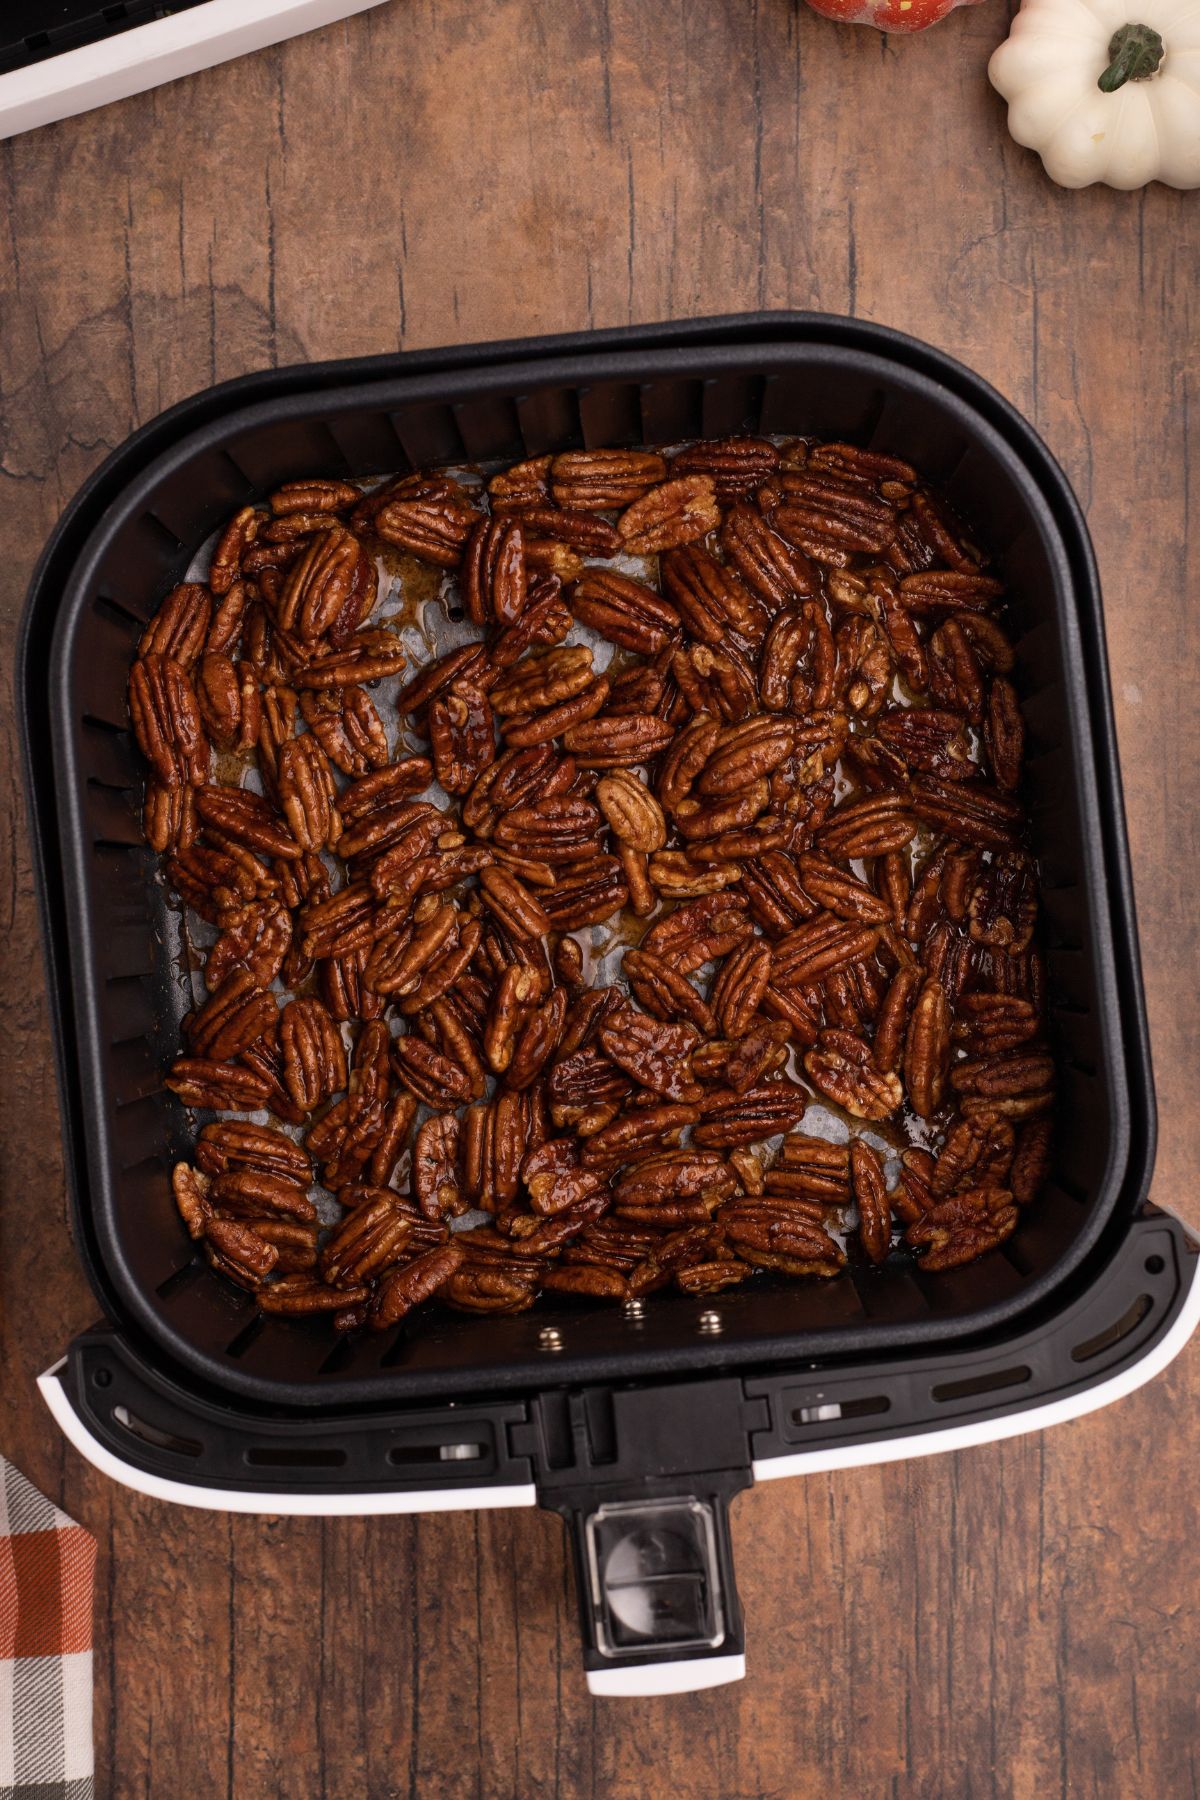 Golden pecans after being cooked in the air fryer